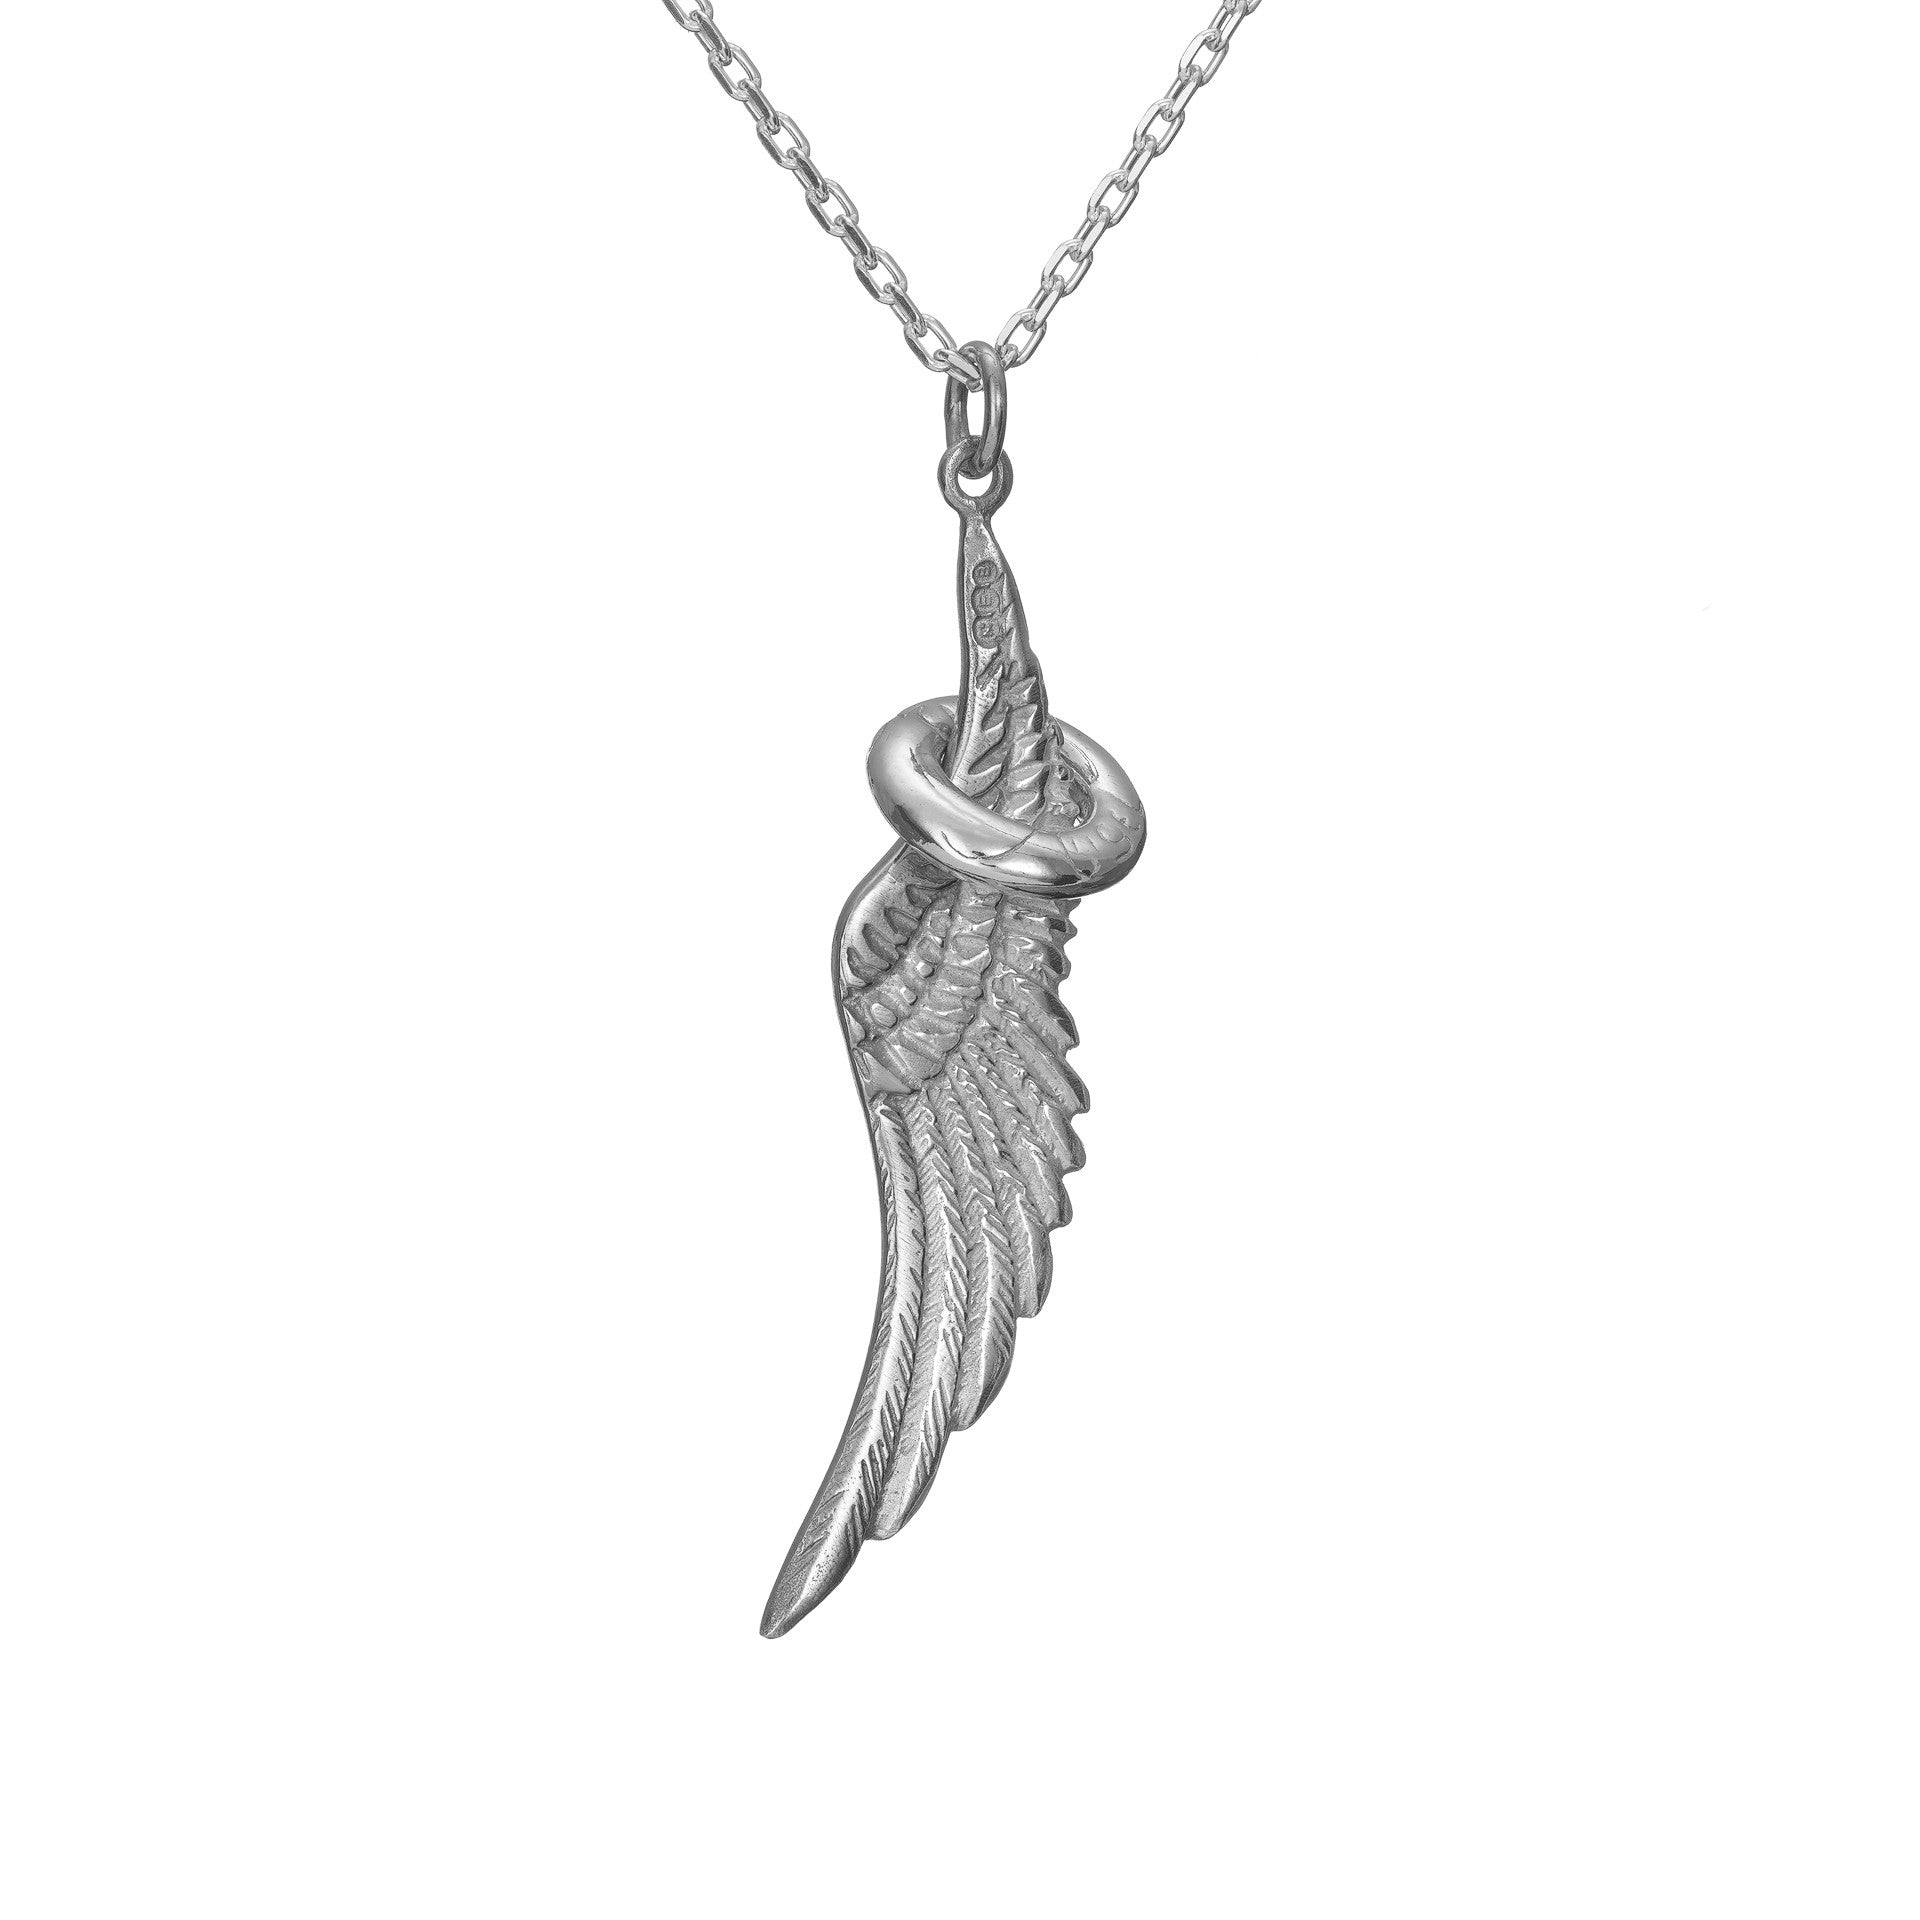 Sterling Silver Angel Wing & Halo Pendant on a silver chain, the perfect Irish jewellery gift. Part of Elena Brennan's My Angel jewellery collection.